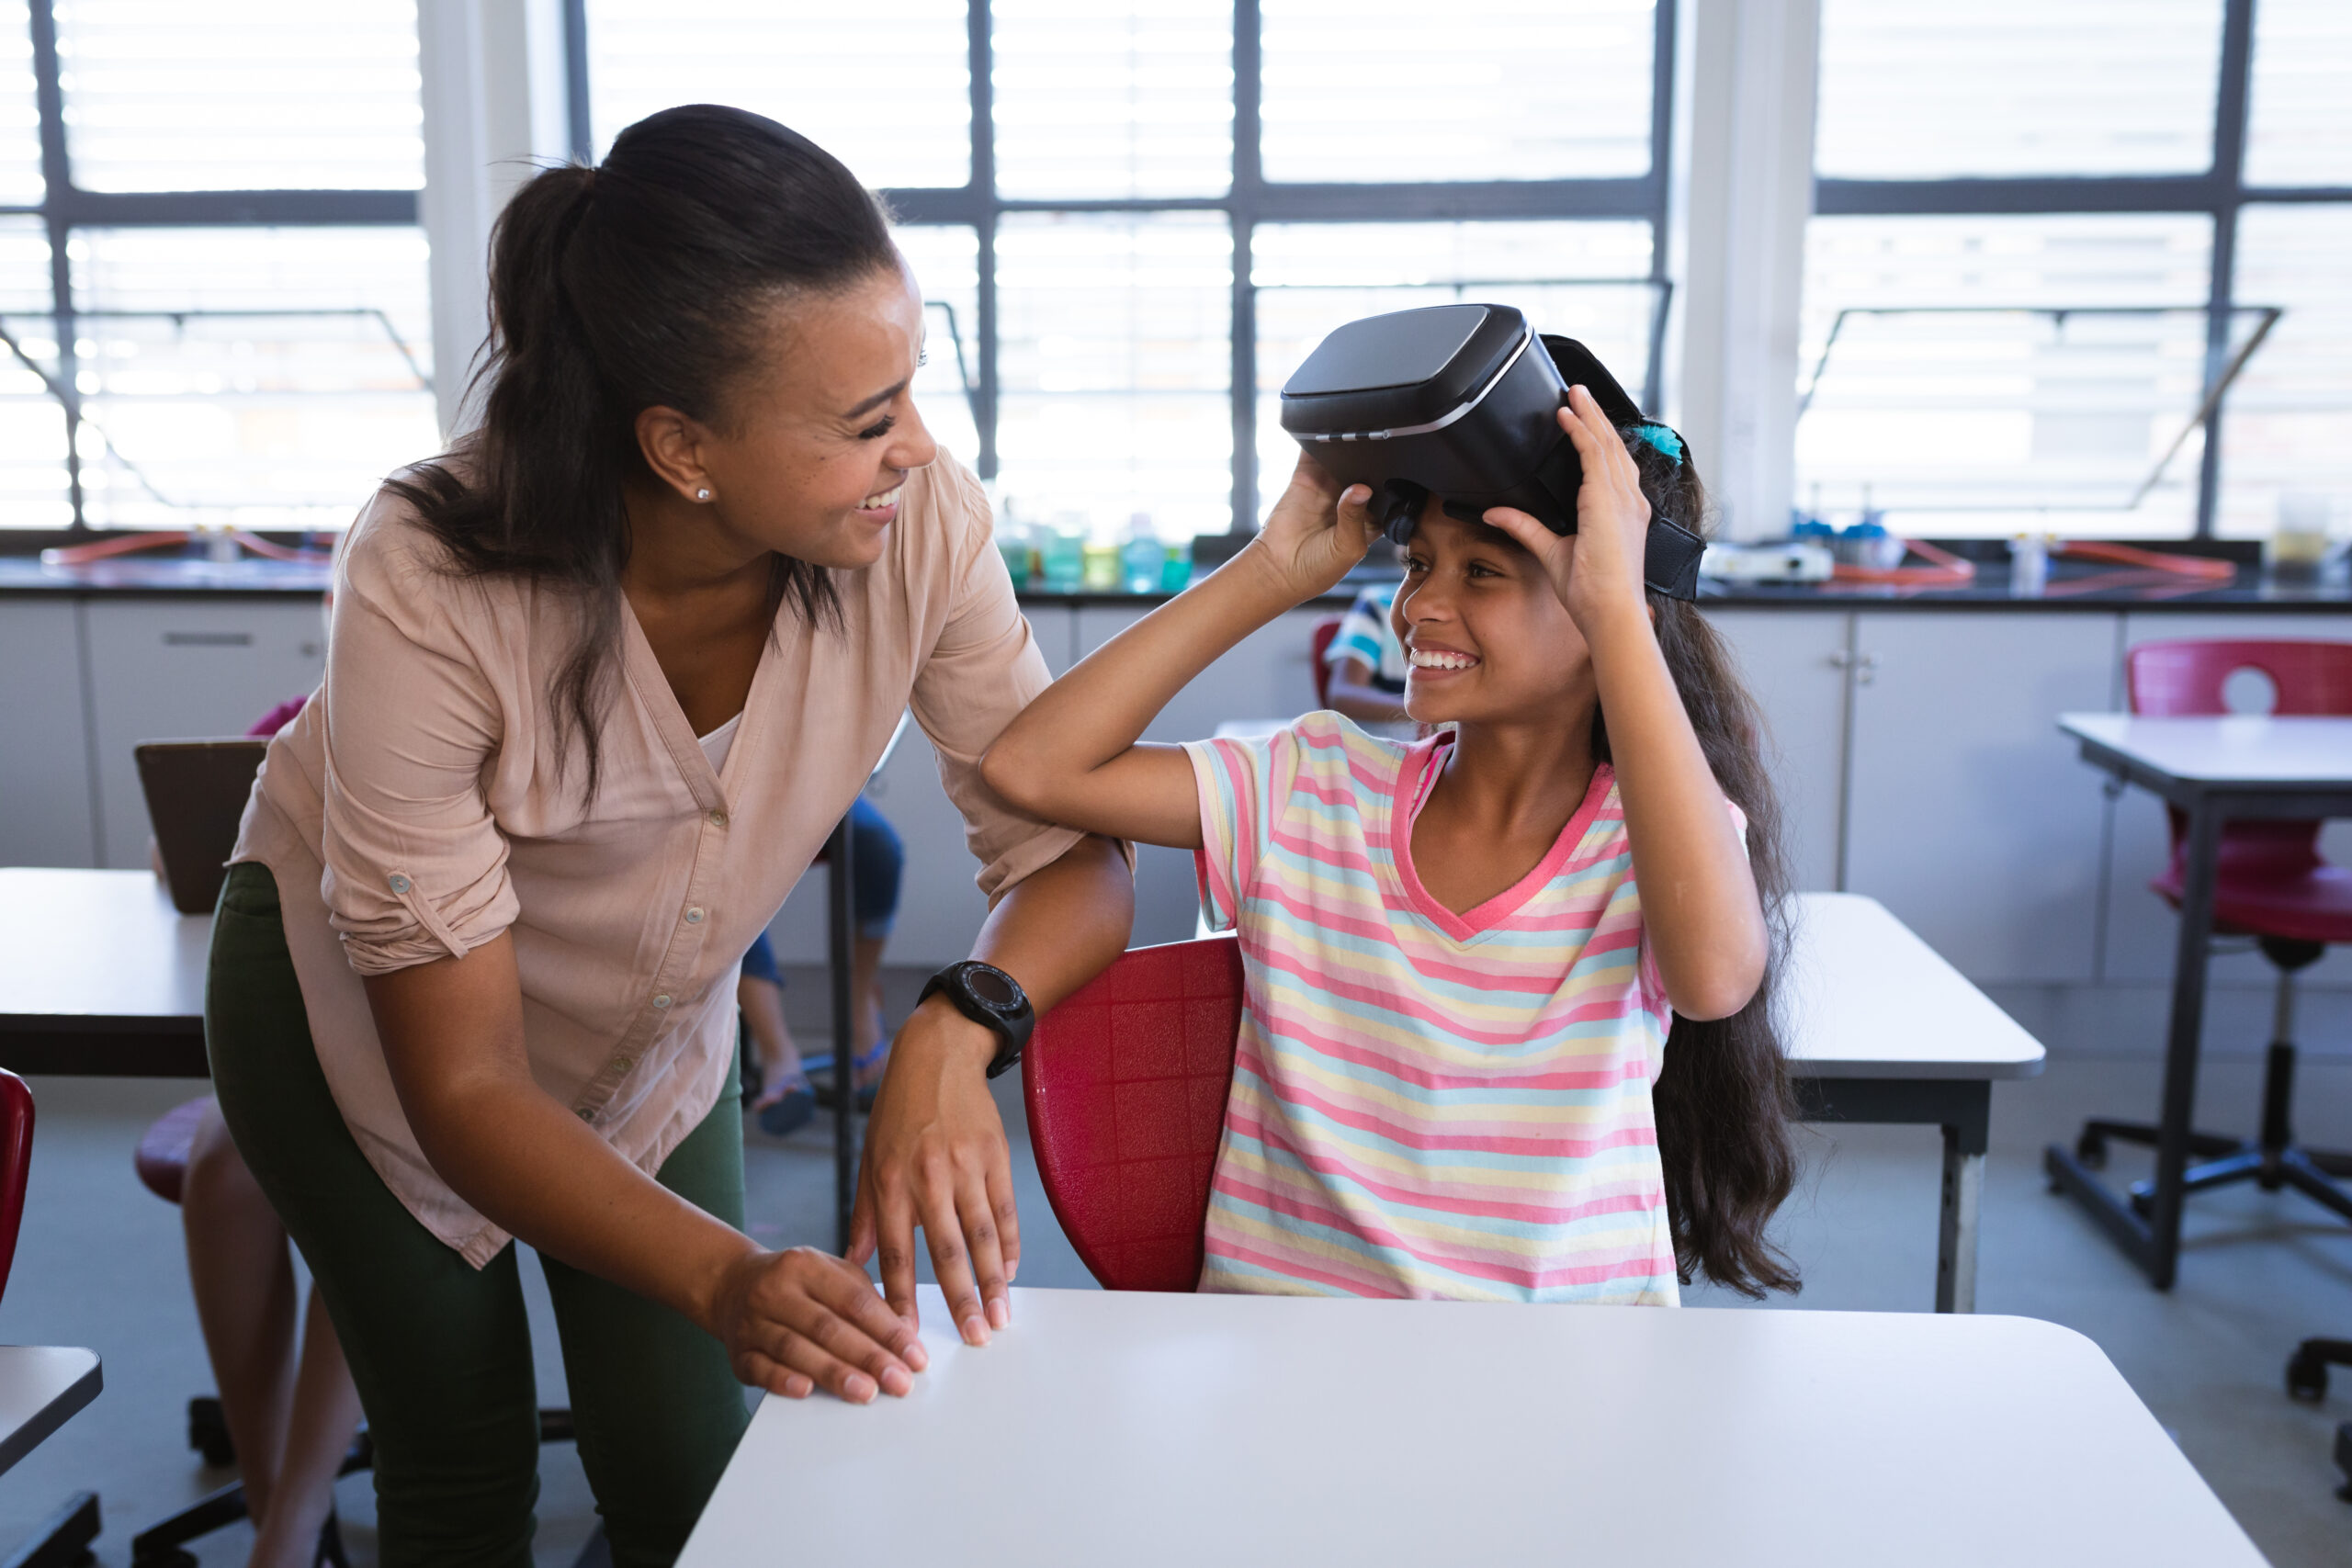 Girl with VR Headset on next to a teacher